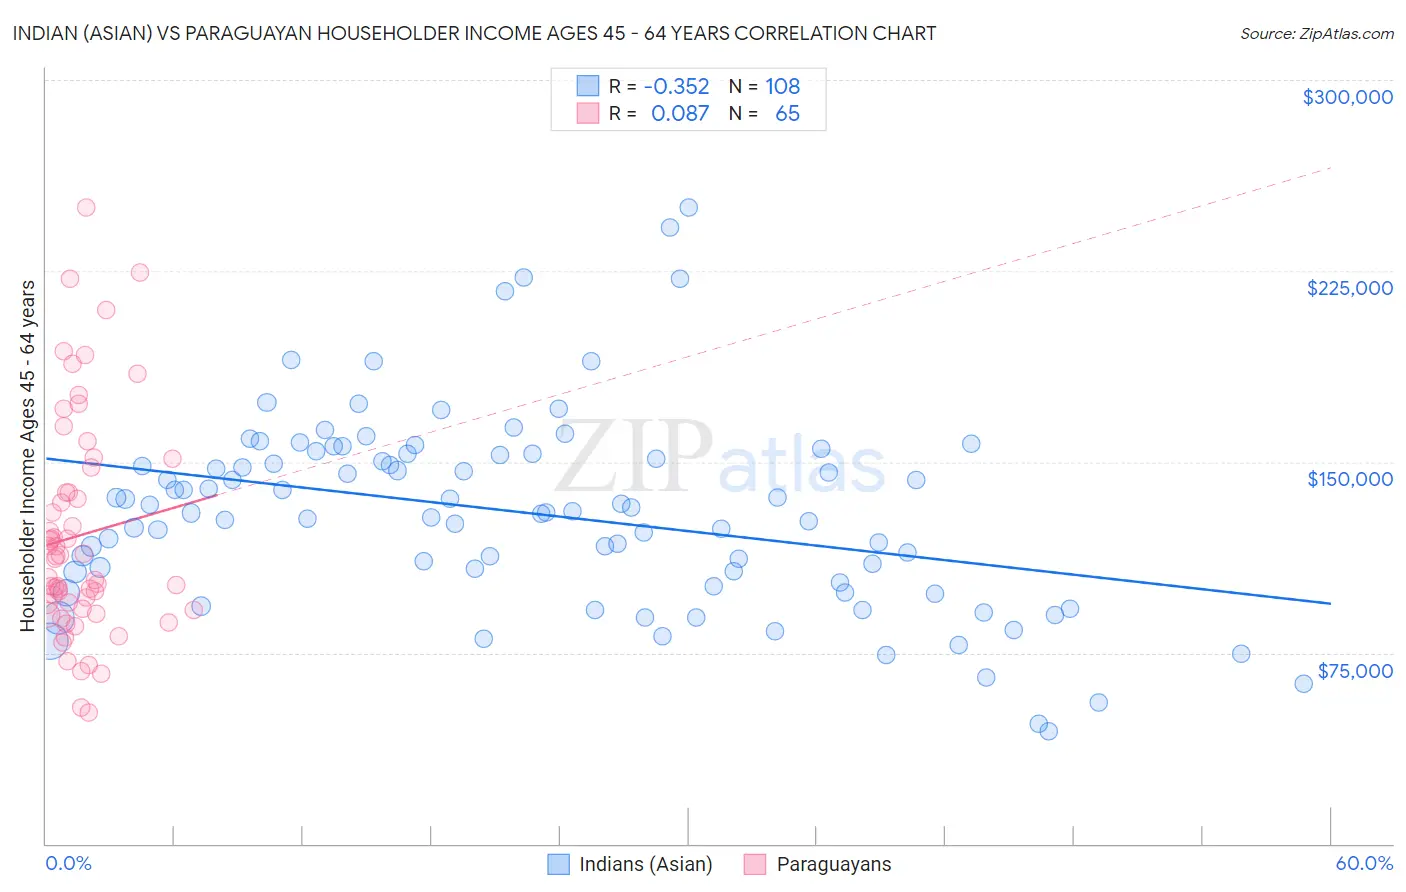 Indian (Asian) vs Paraguayan Householder Income Ages 45 - 64 years